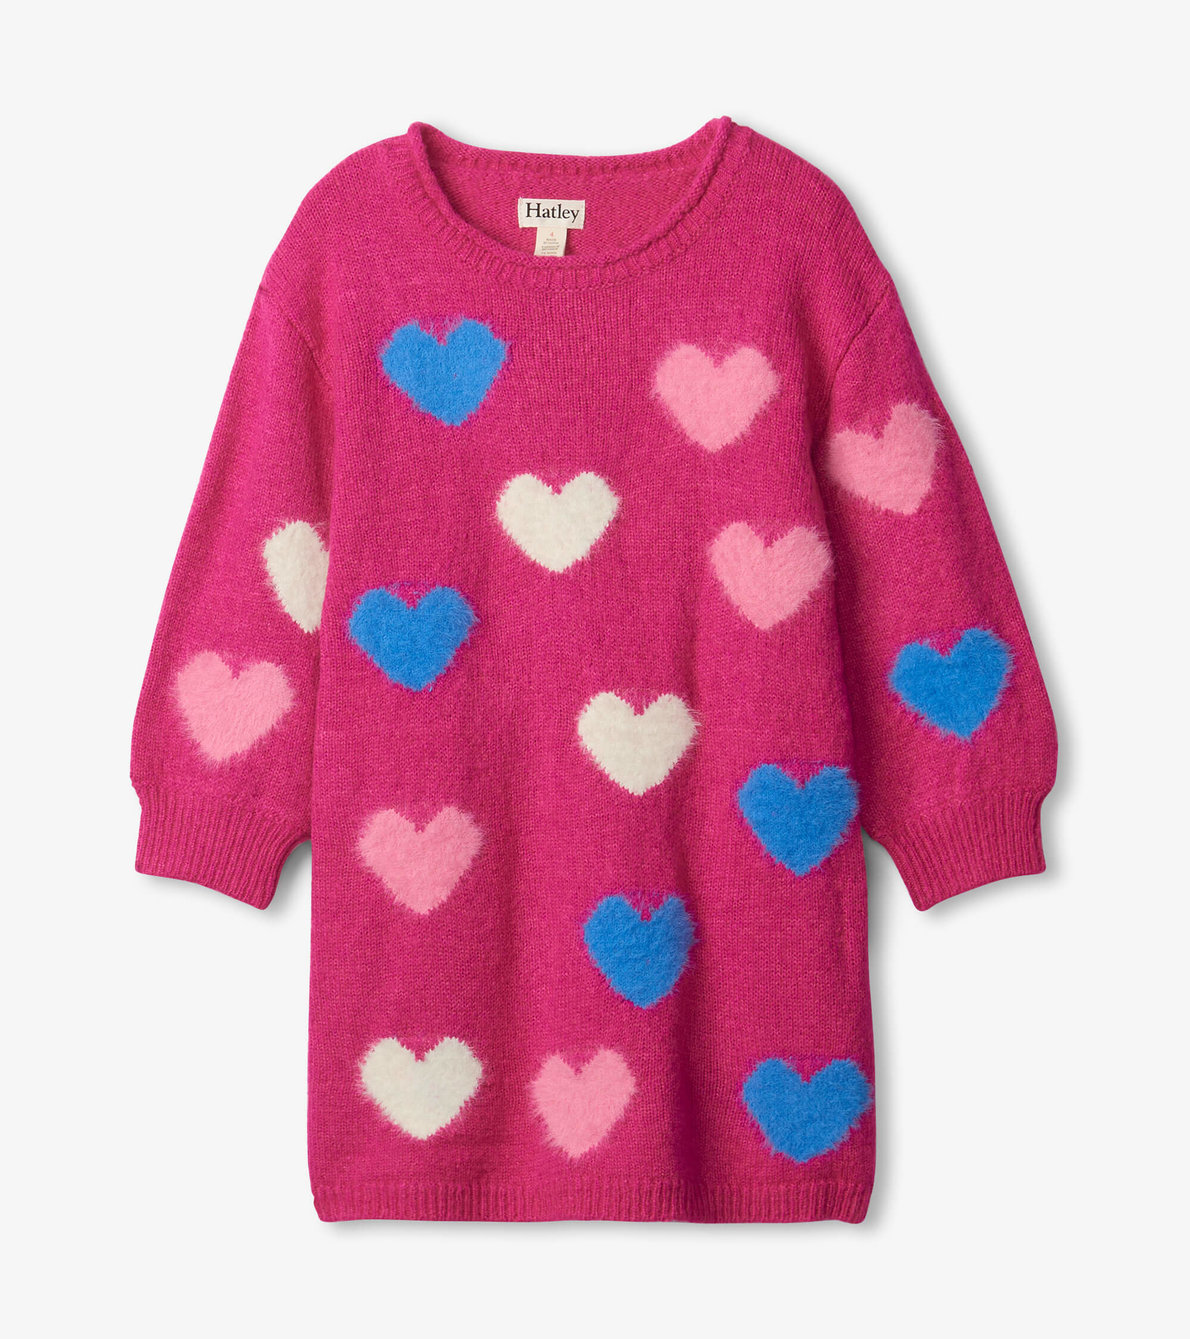 View larger image of Girls Magical Hearts Sweater Dress